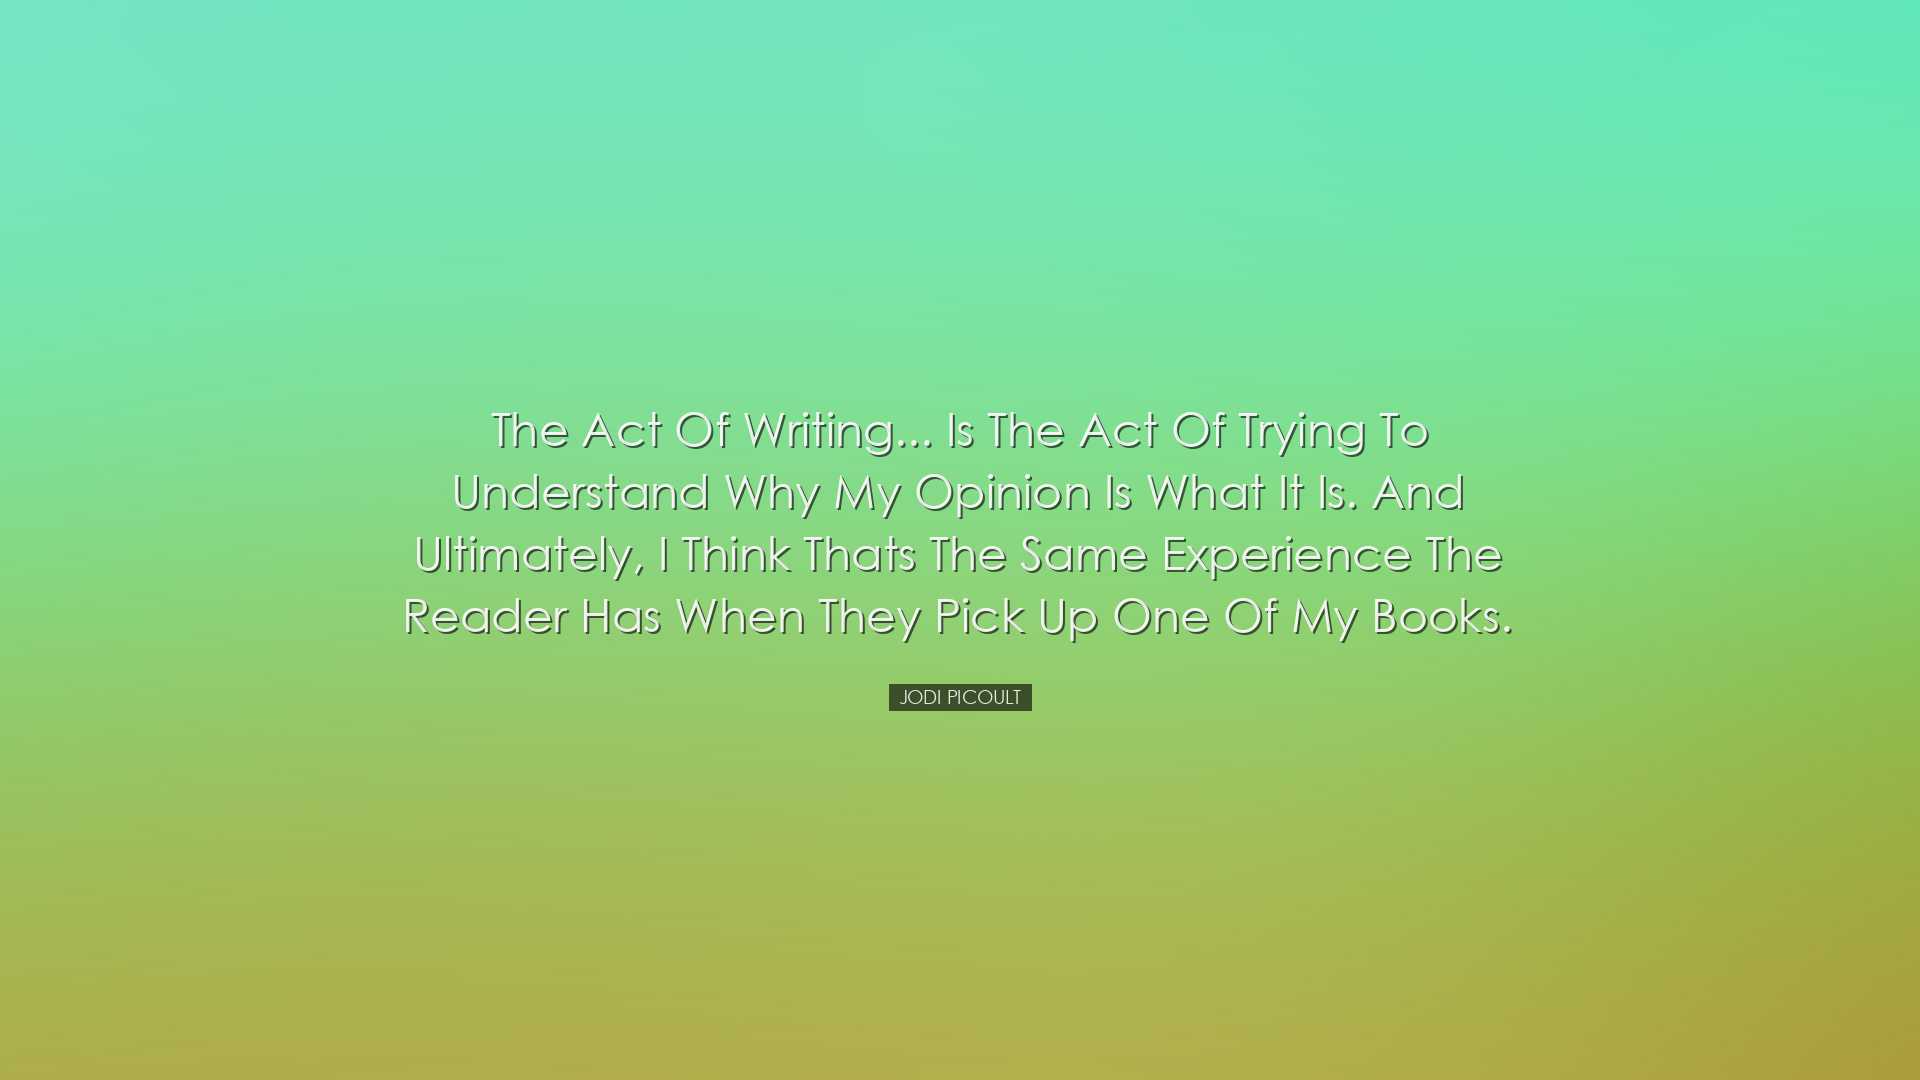 The act of writing... is the act of trying to understand why my op